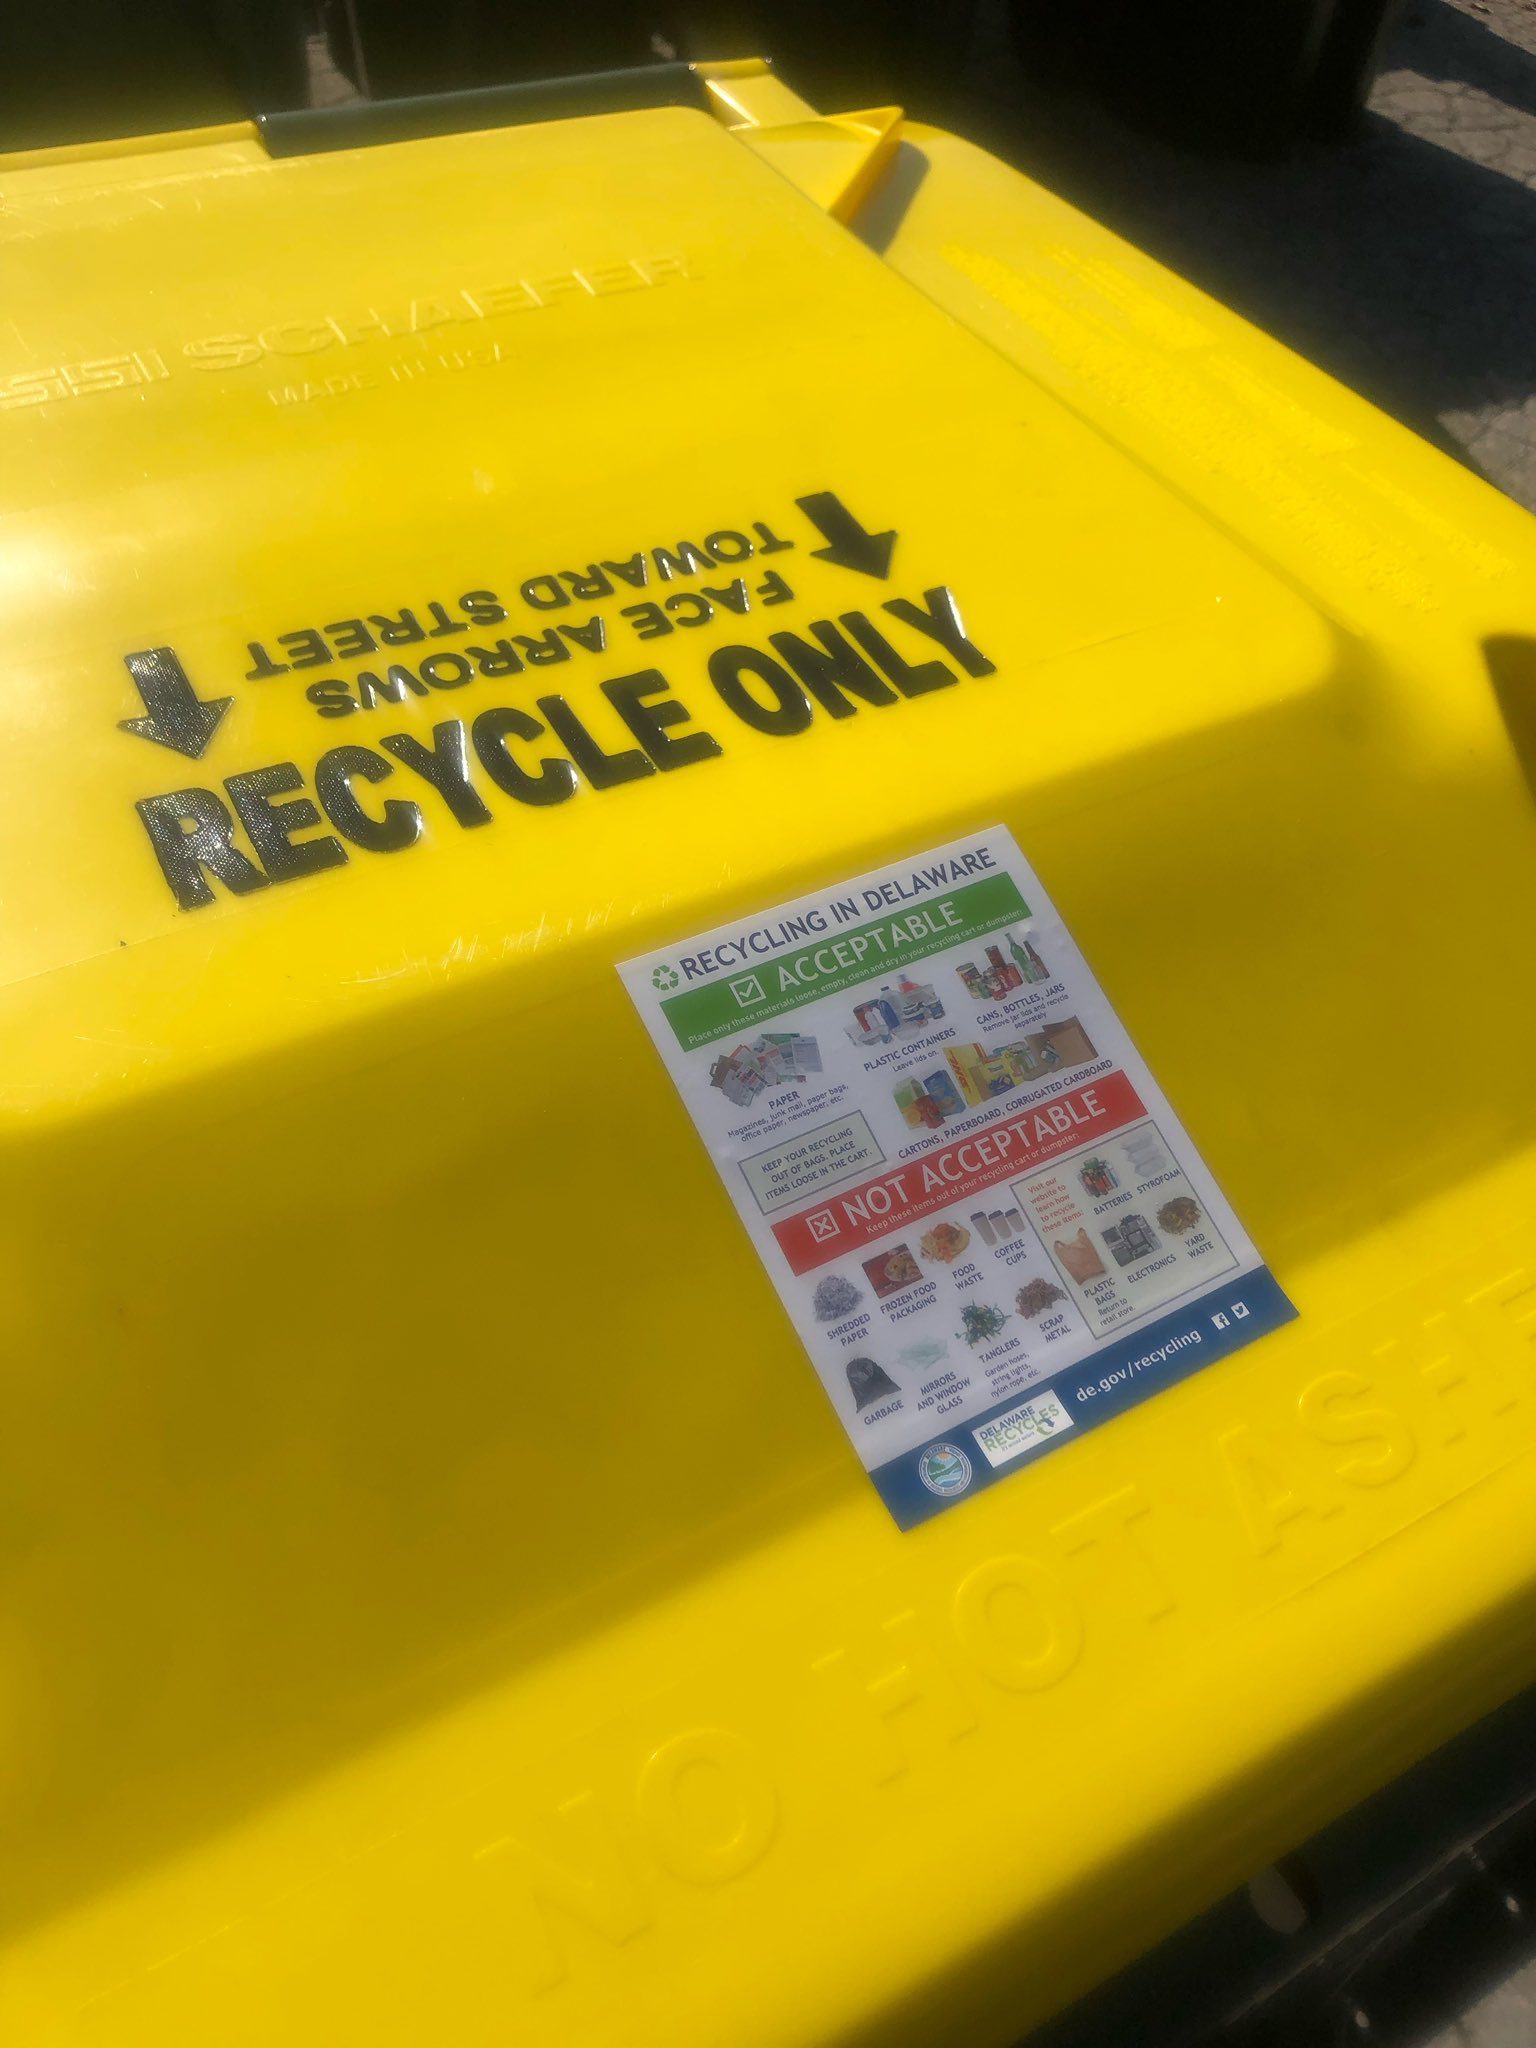 Featured image for “Newark to conduct recycling audits beginning Feb. 24”